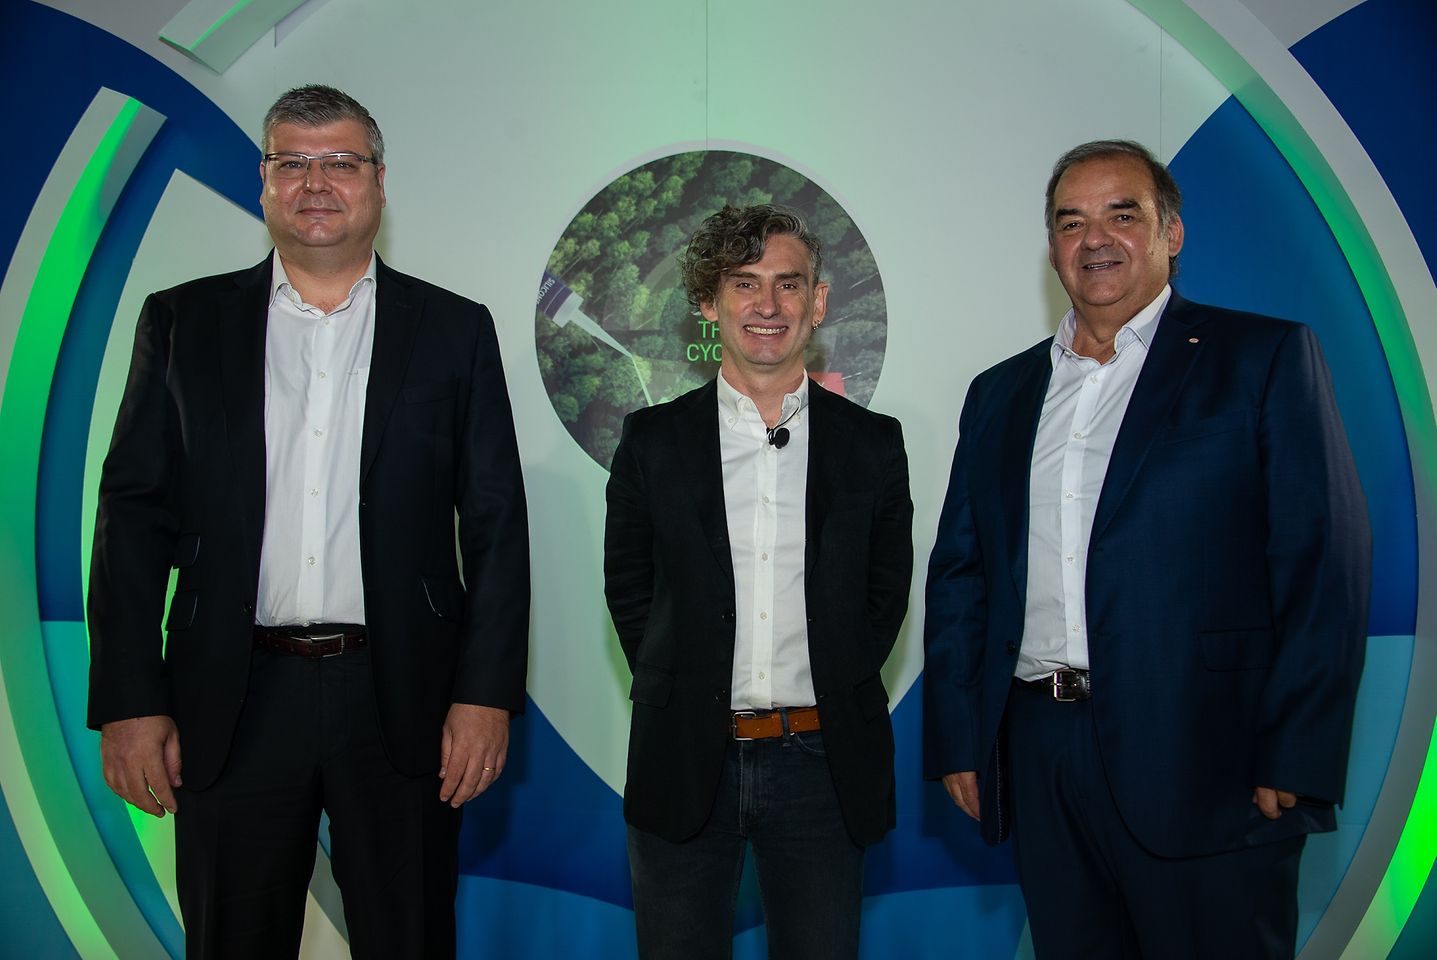 From left to right: Albert Lipperheide, General Manager for Consumer Adhesives at Henkel in Chile, Andres Mitnik, Fundación Chile, and Roberto Pavez, Regional Development Manager for Latin America at Henkel Adhesive Technologies, underlined the combination of environmental and social benefits of CRDC´s solution. 